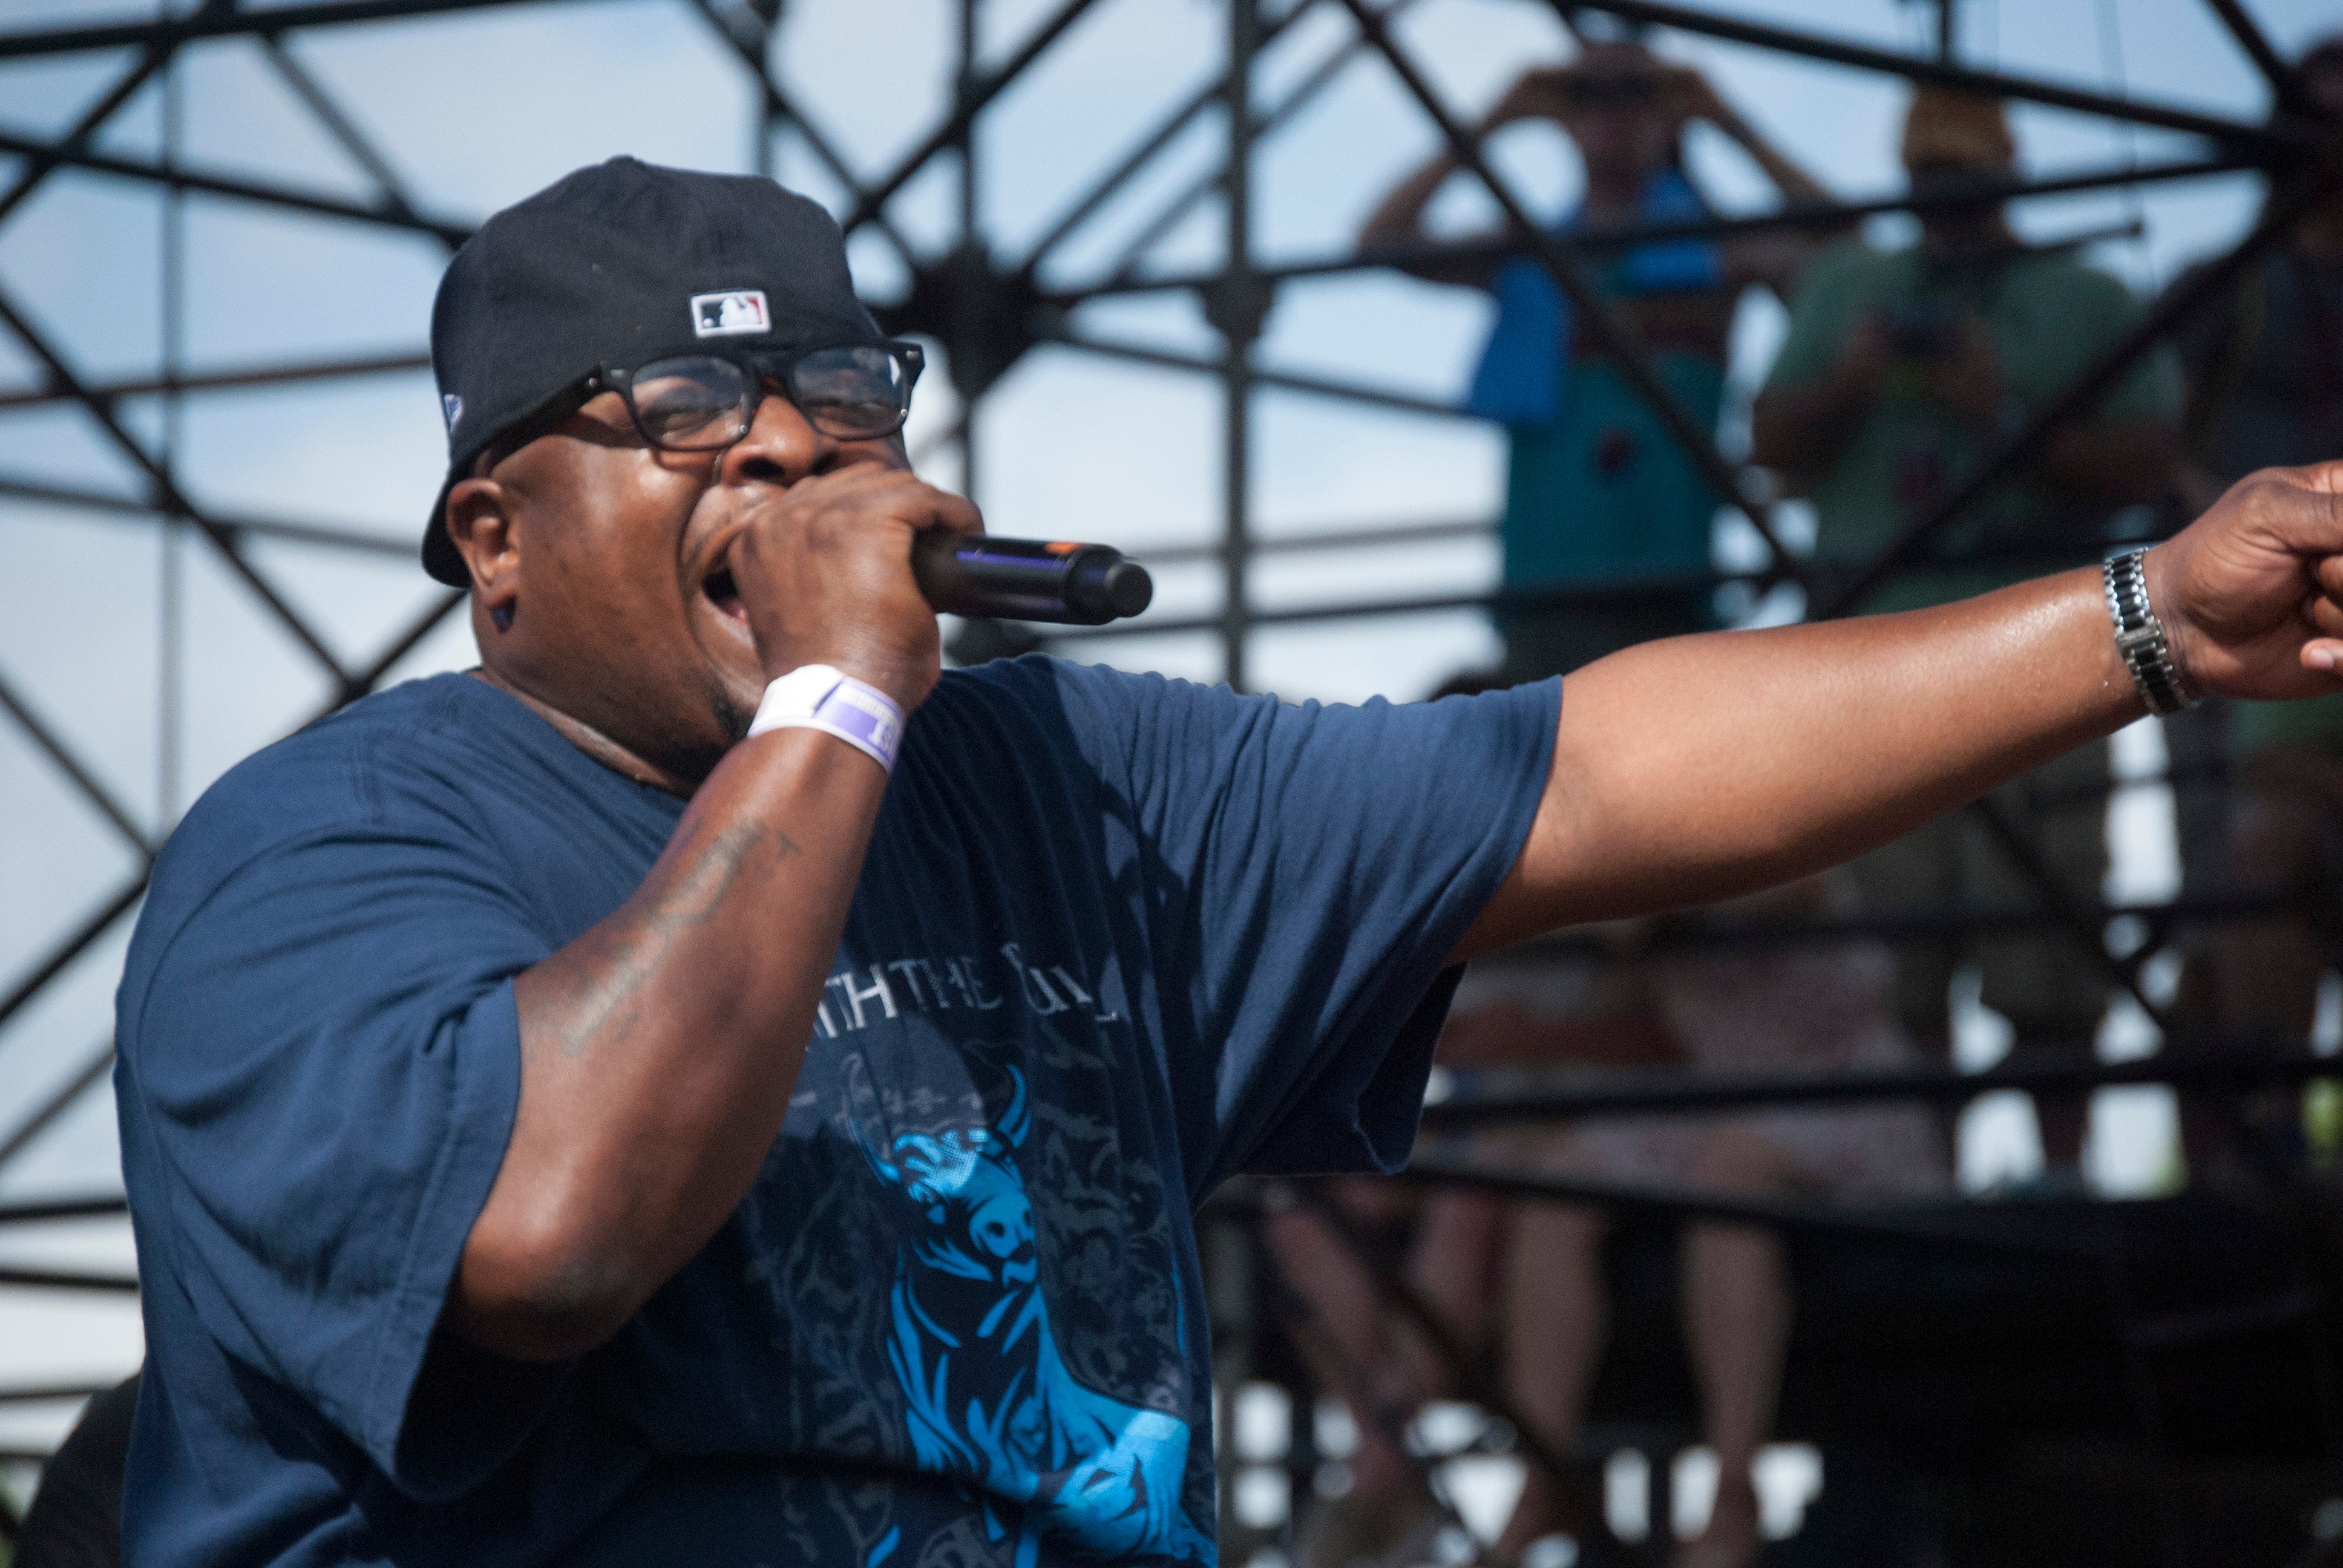 An Evening Of Hip Hop: Scarface, 8 Ball & Mjg, Too Short, Trick Daddy, presales in Mableton